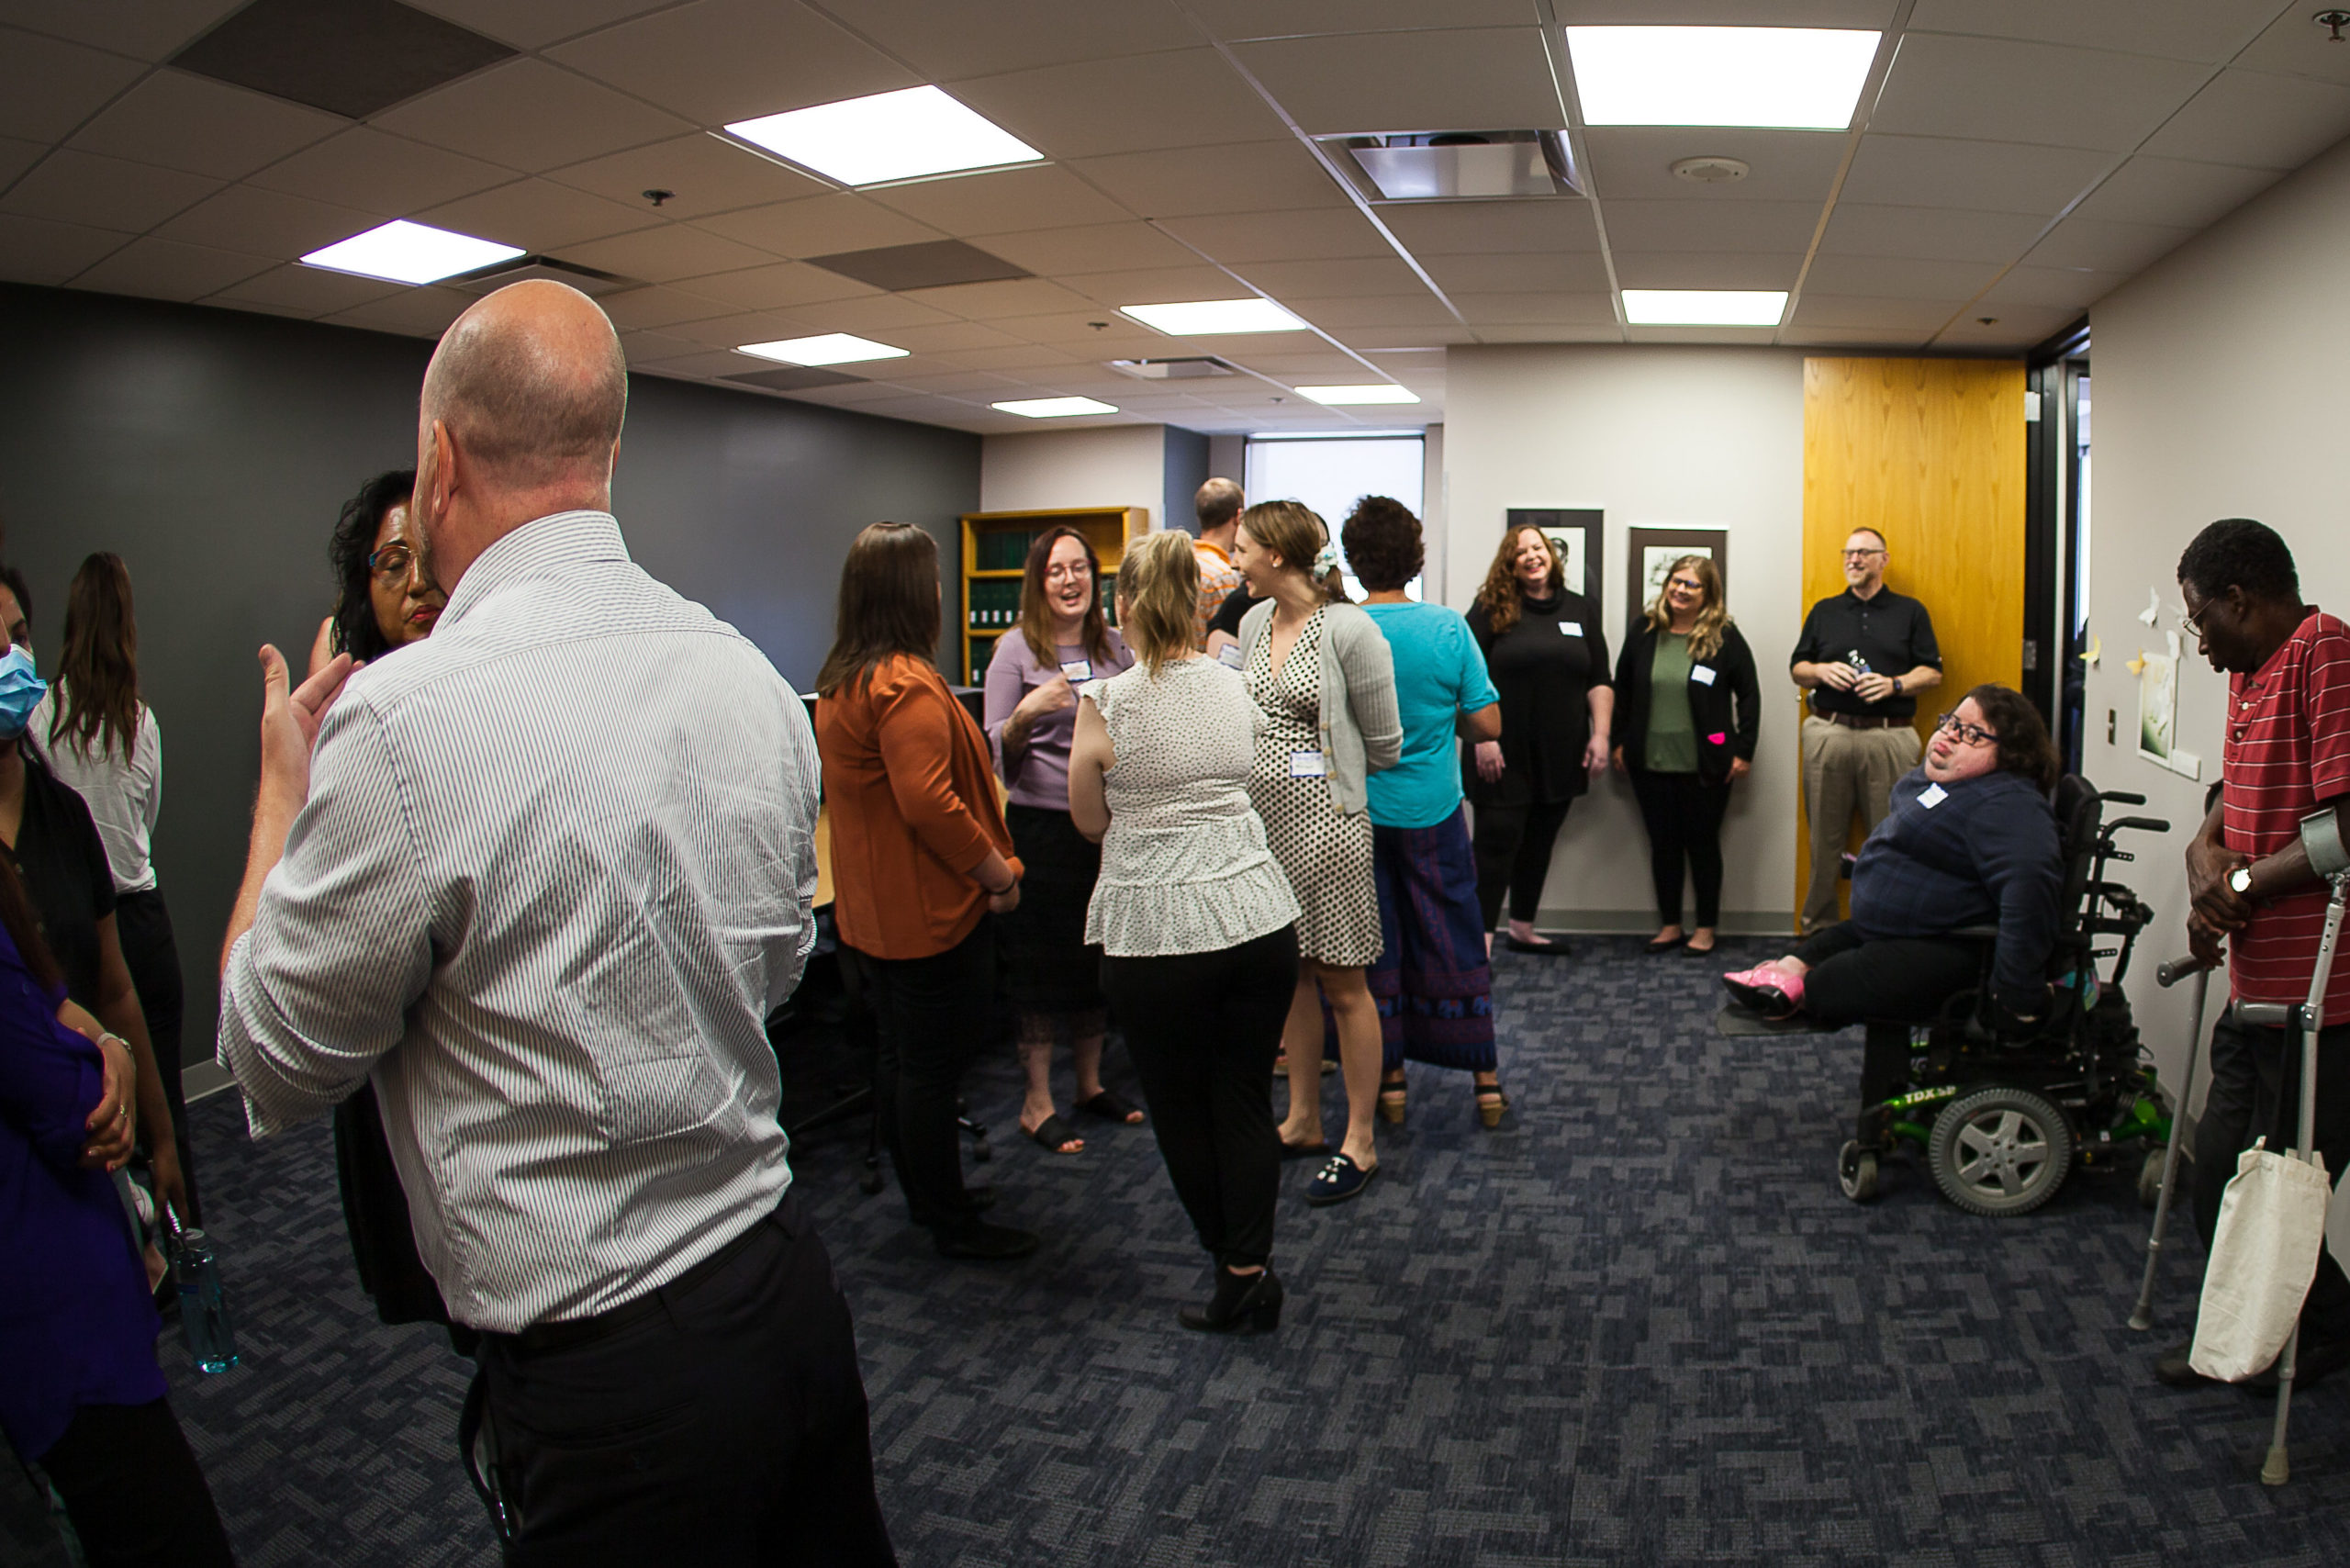 Group of individuals stand around in a conference room. Each one is talking to another person in the room, sometimes groups of people during an event at DRI.